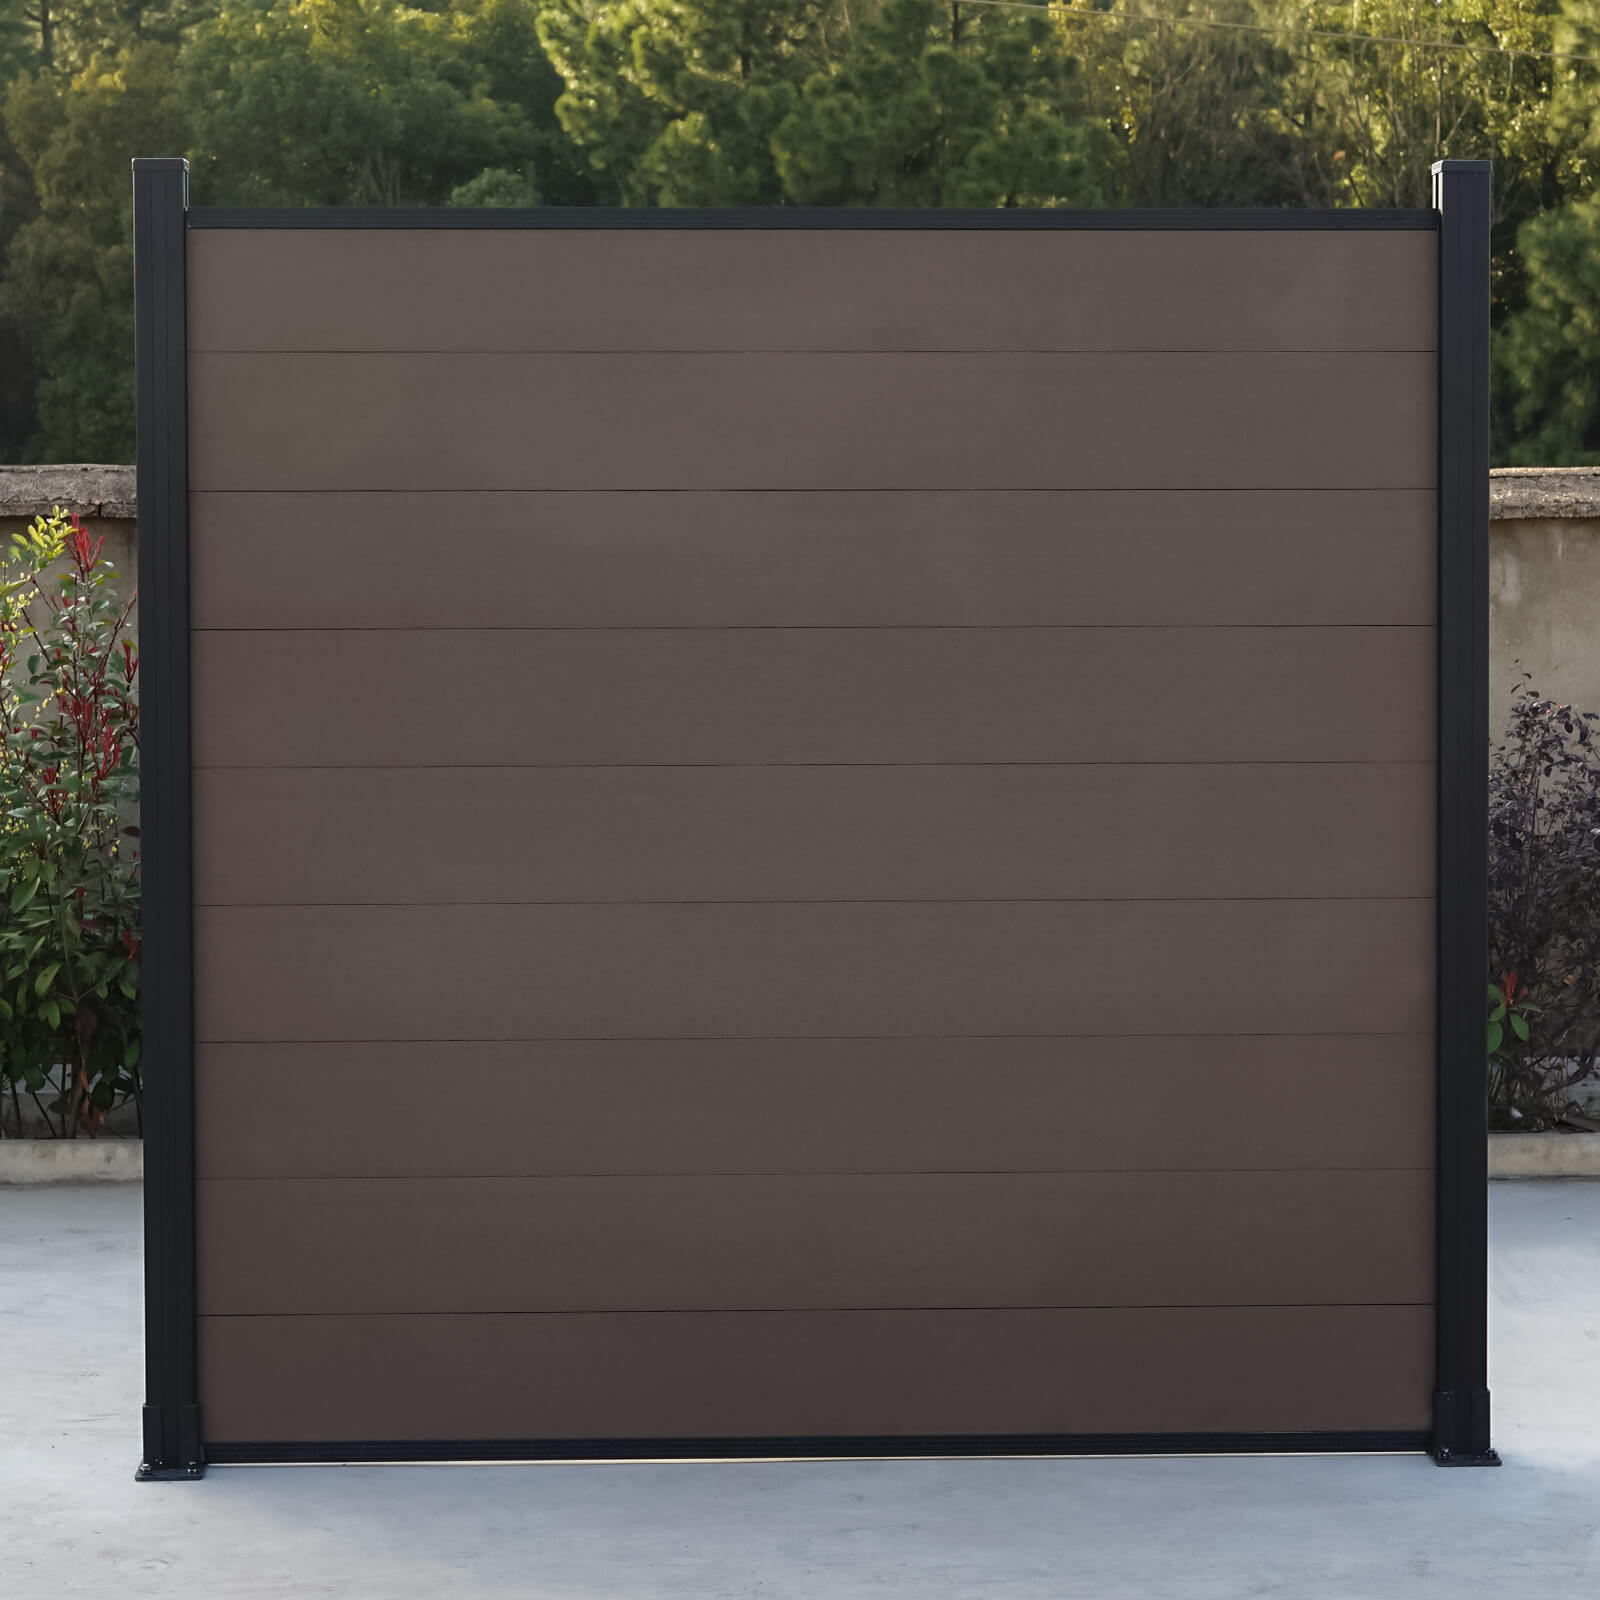 DIY 6 ft. H x 6 ft. W x 0.8 in horizontal privacy composite fence panel for outdoor AM10112